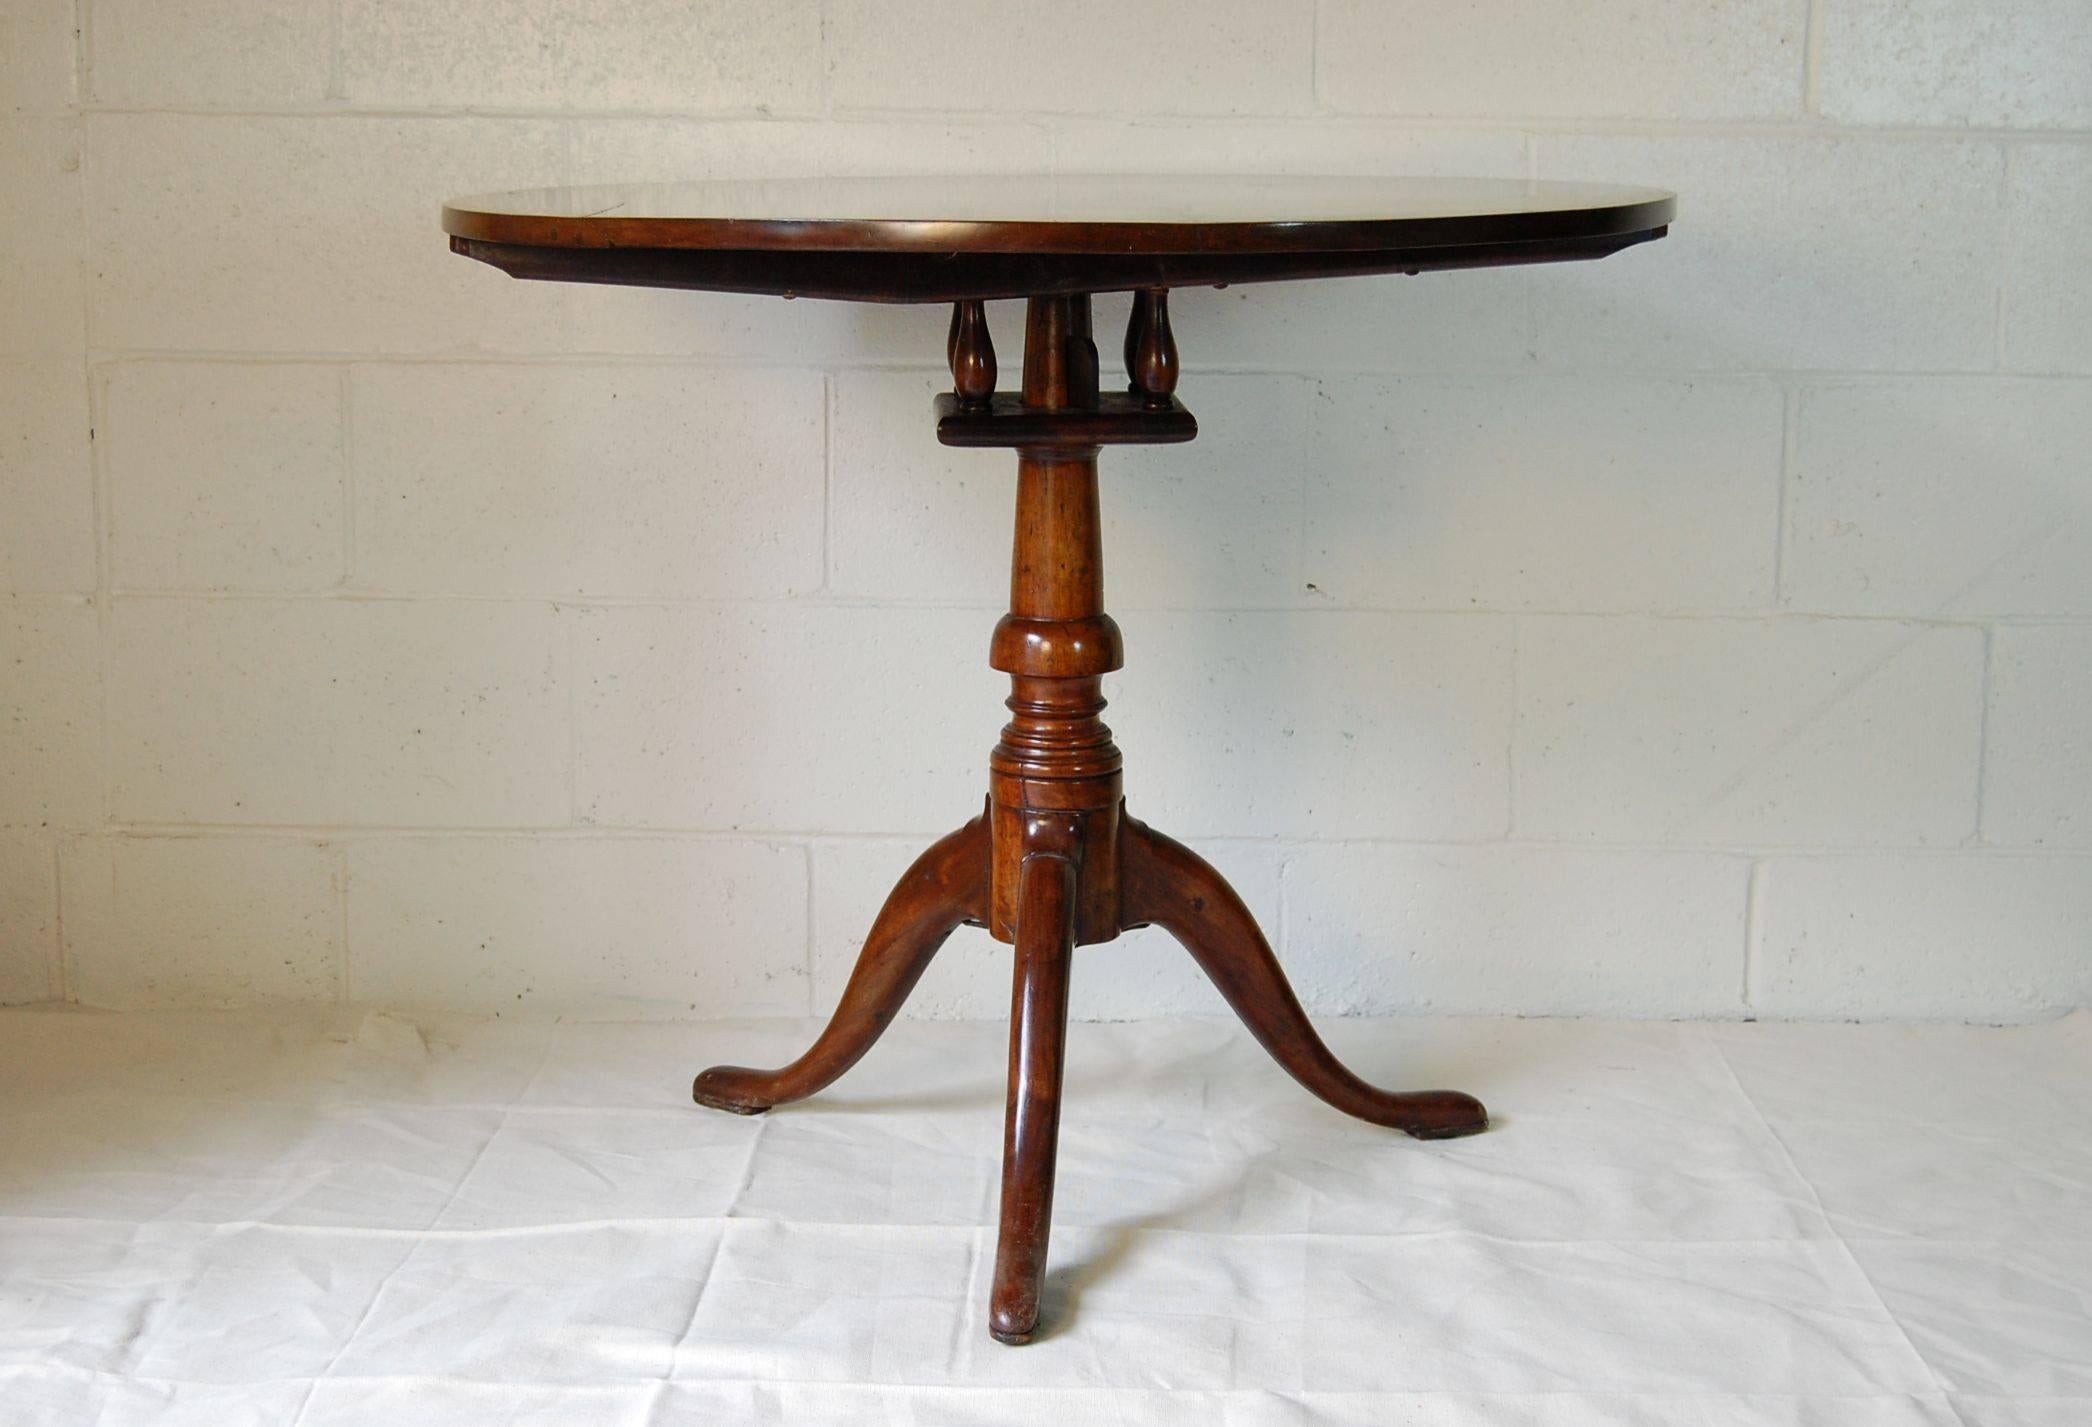 Late 18th-early 19th century mahogany tilt-top table in excellent condition with original hardware.